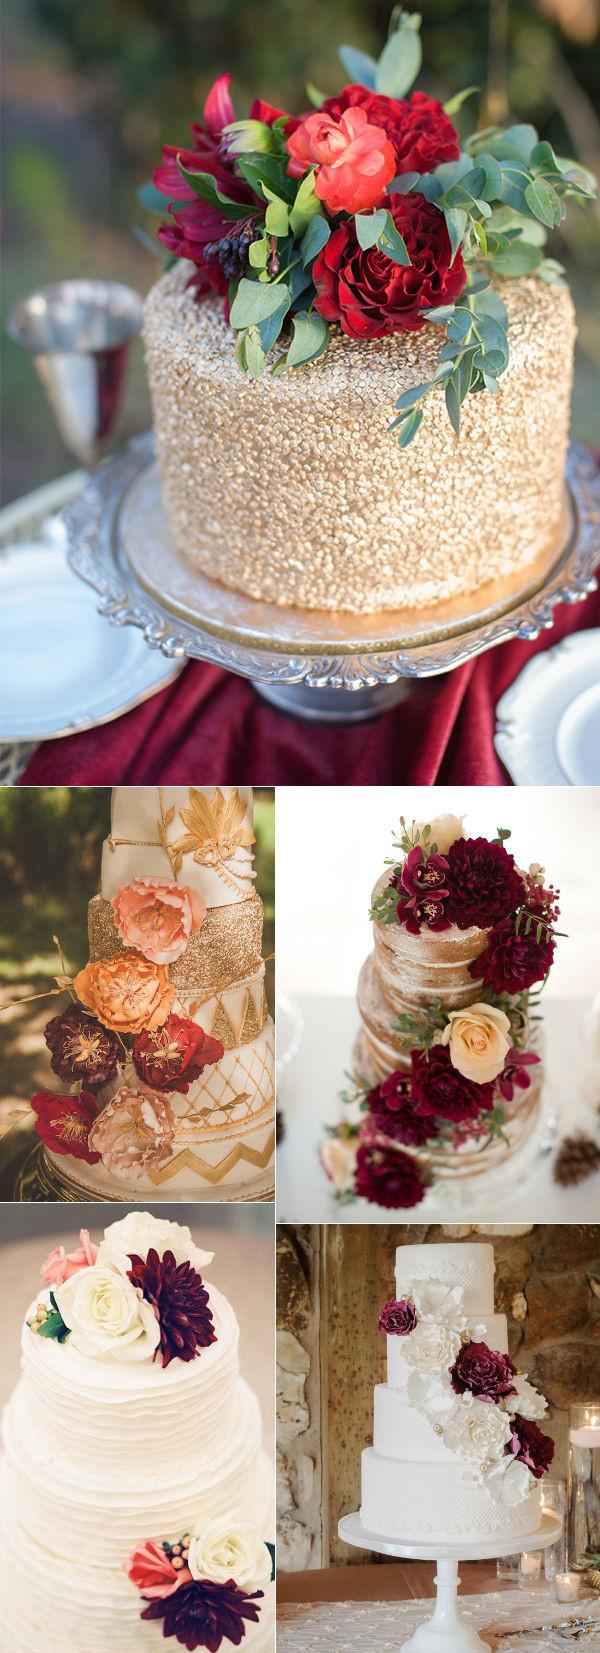 Small Fall Wedding Cakes
 32 Amazing Wedding Cakes Perfect For Fall